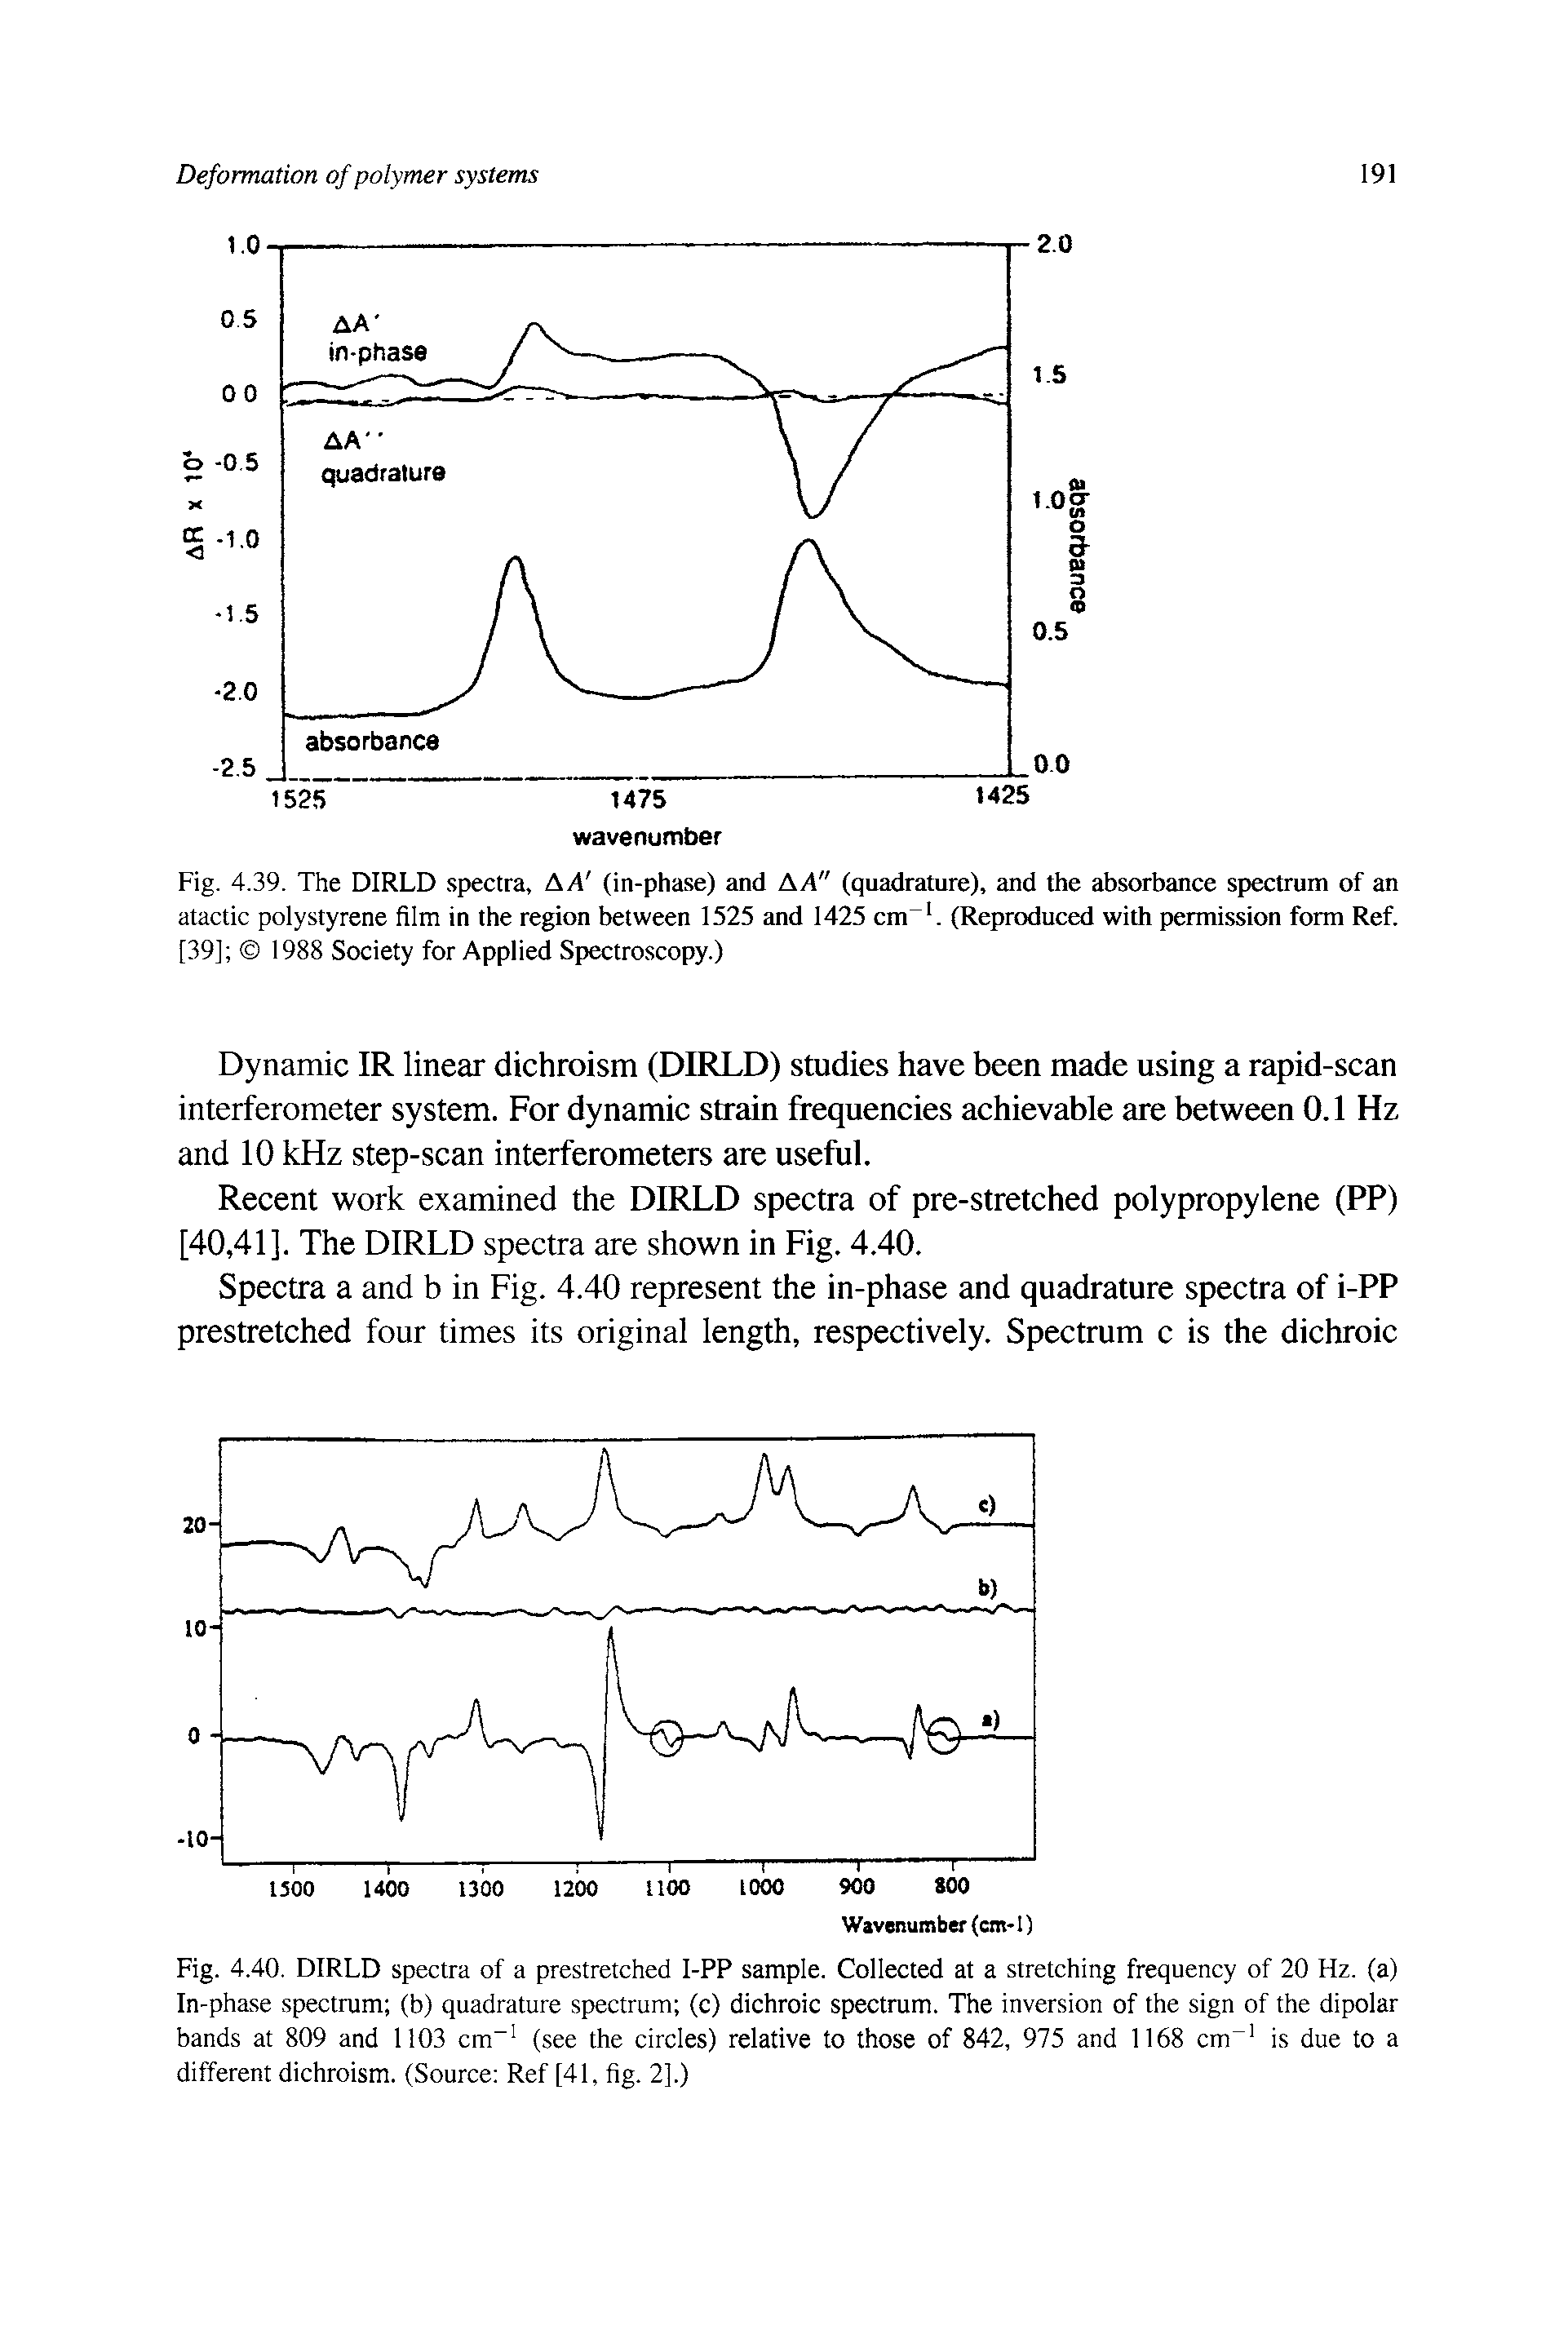 Fig. 4.39. The DIRLD spectra, AA (in-phase) and AA" (quadrature), and the absorbance spectrum of an atactic polystyrene film in the region between 1525 and 1425 cm. (Reproduced with permission form Ref. [39] 1988 Society for Applied Spectroscopy.)...